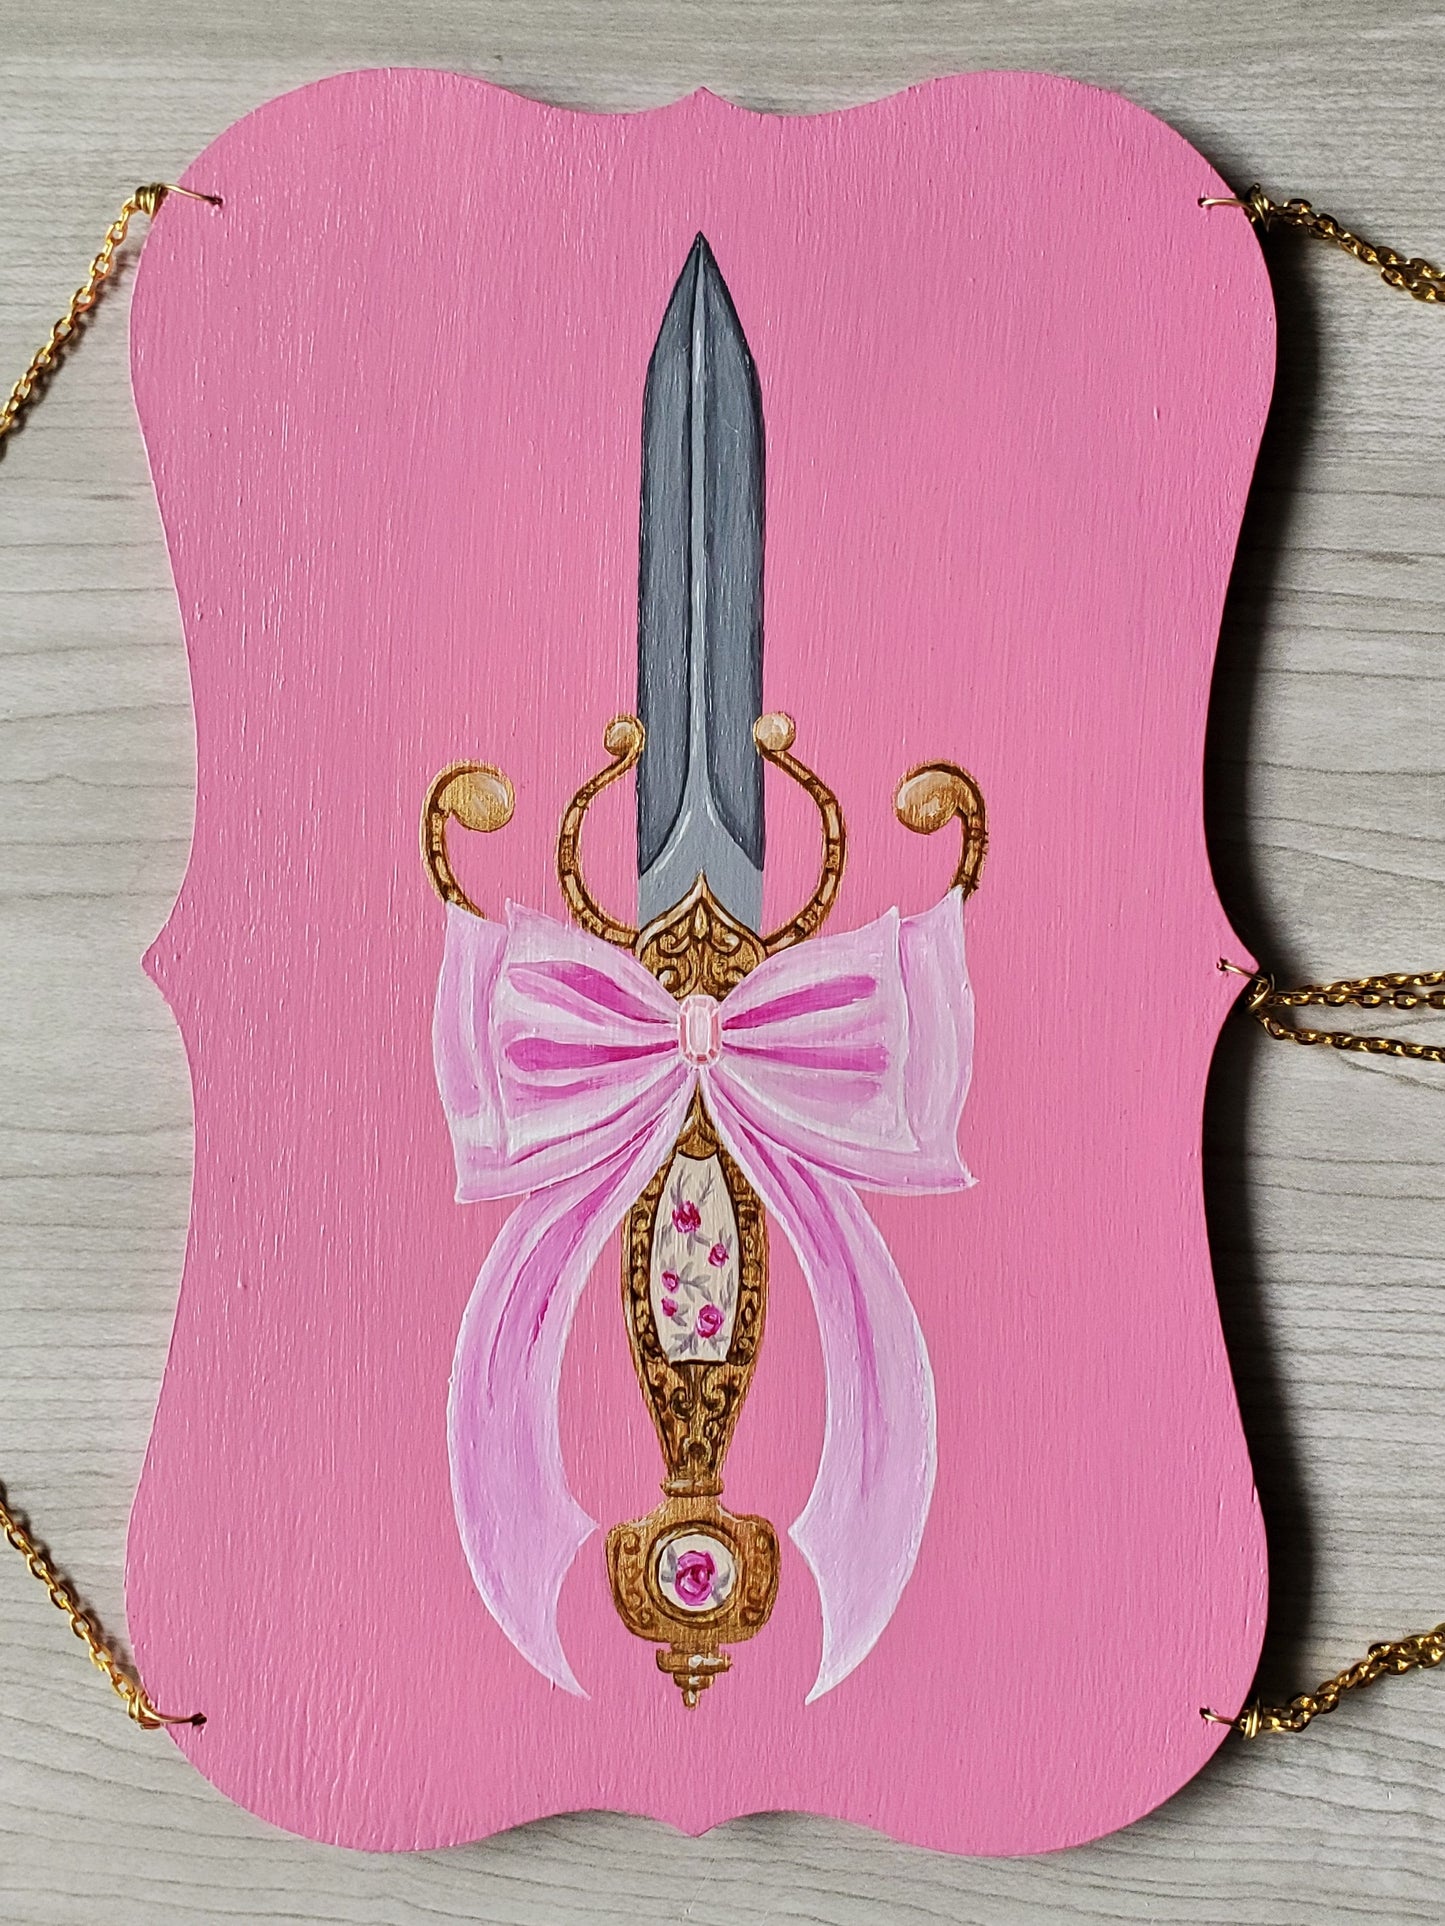 Coquette Sword Painting